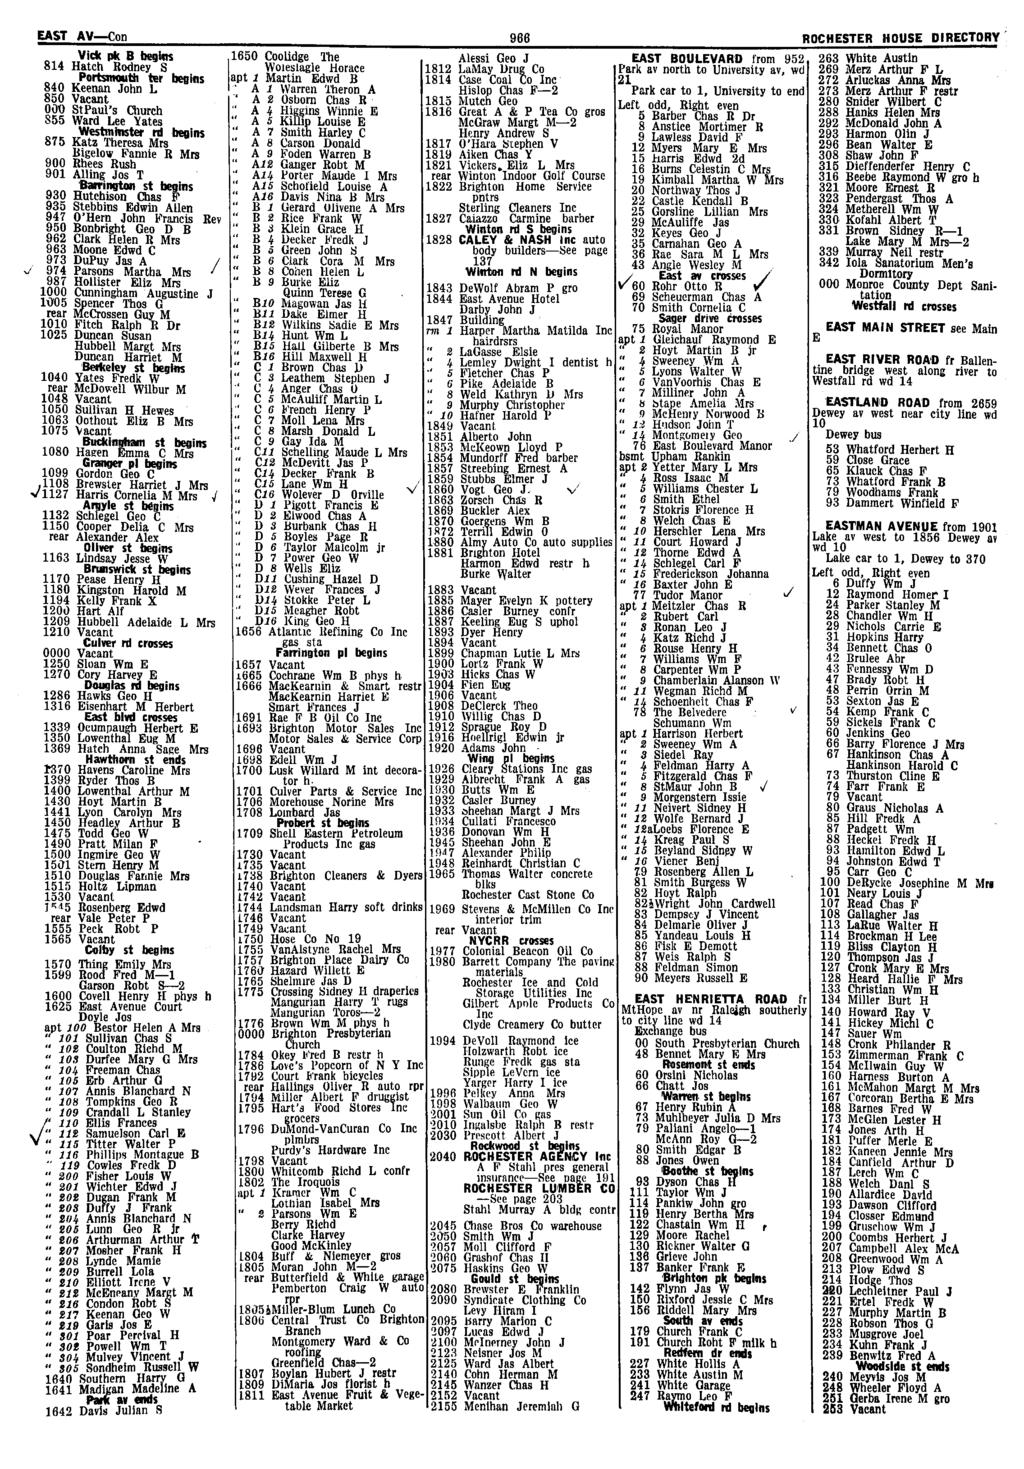 _ Central Library of Rocester and Monroe County - City Directory Collection - 933 EAST AVCon ROCHESTER HOUSE DIRECTORY Vick pk B begins 84 Hatc Rodney S Portsmout ter begins 840 Keenan Jon L 850 OOO